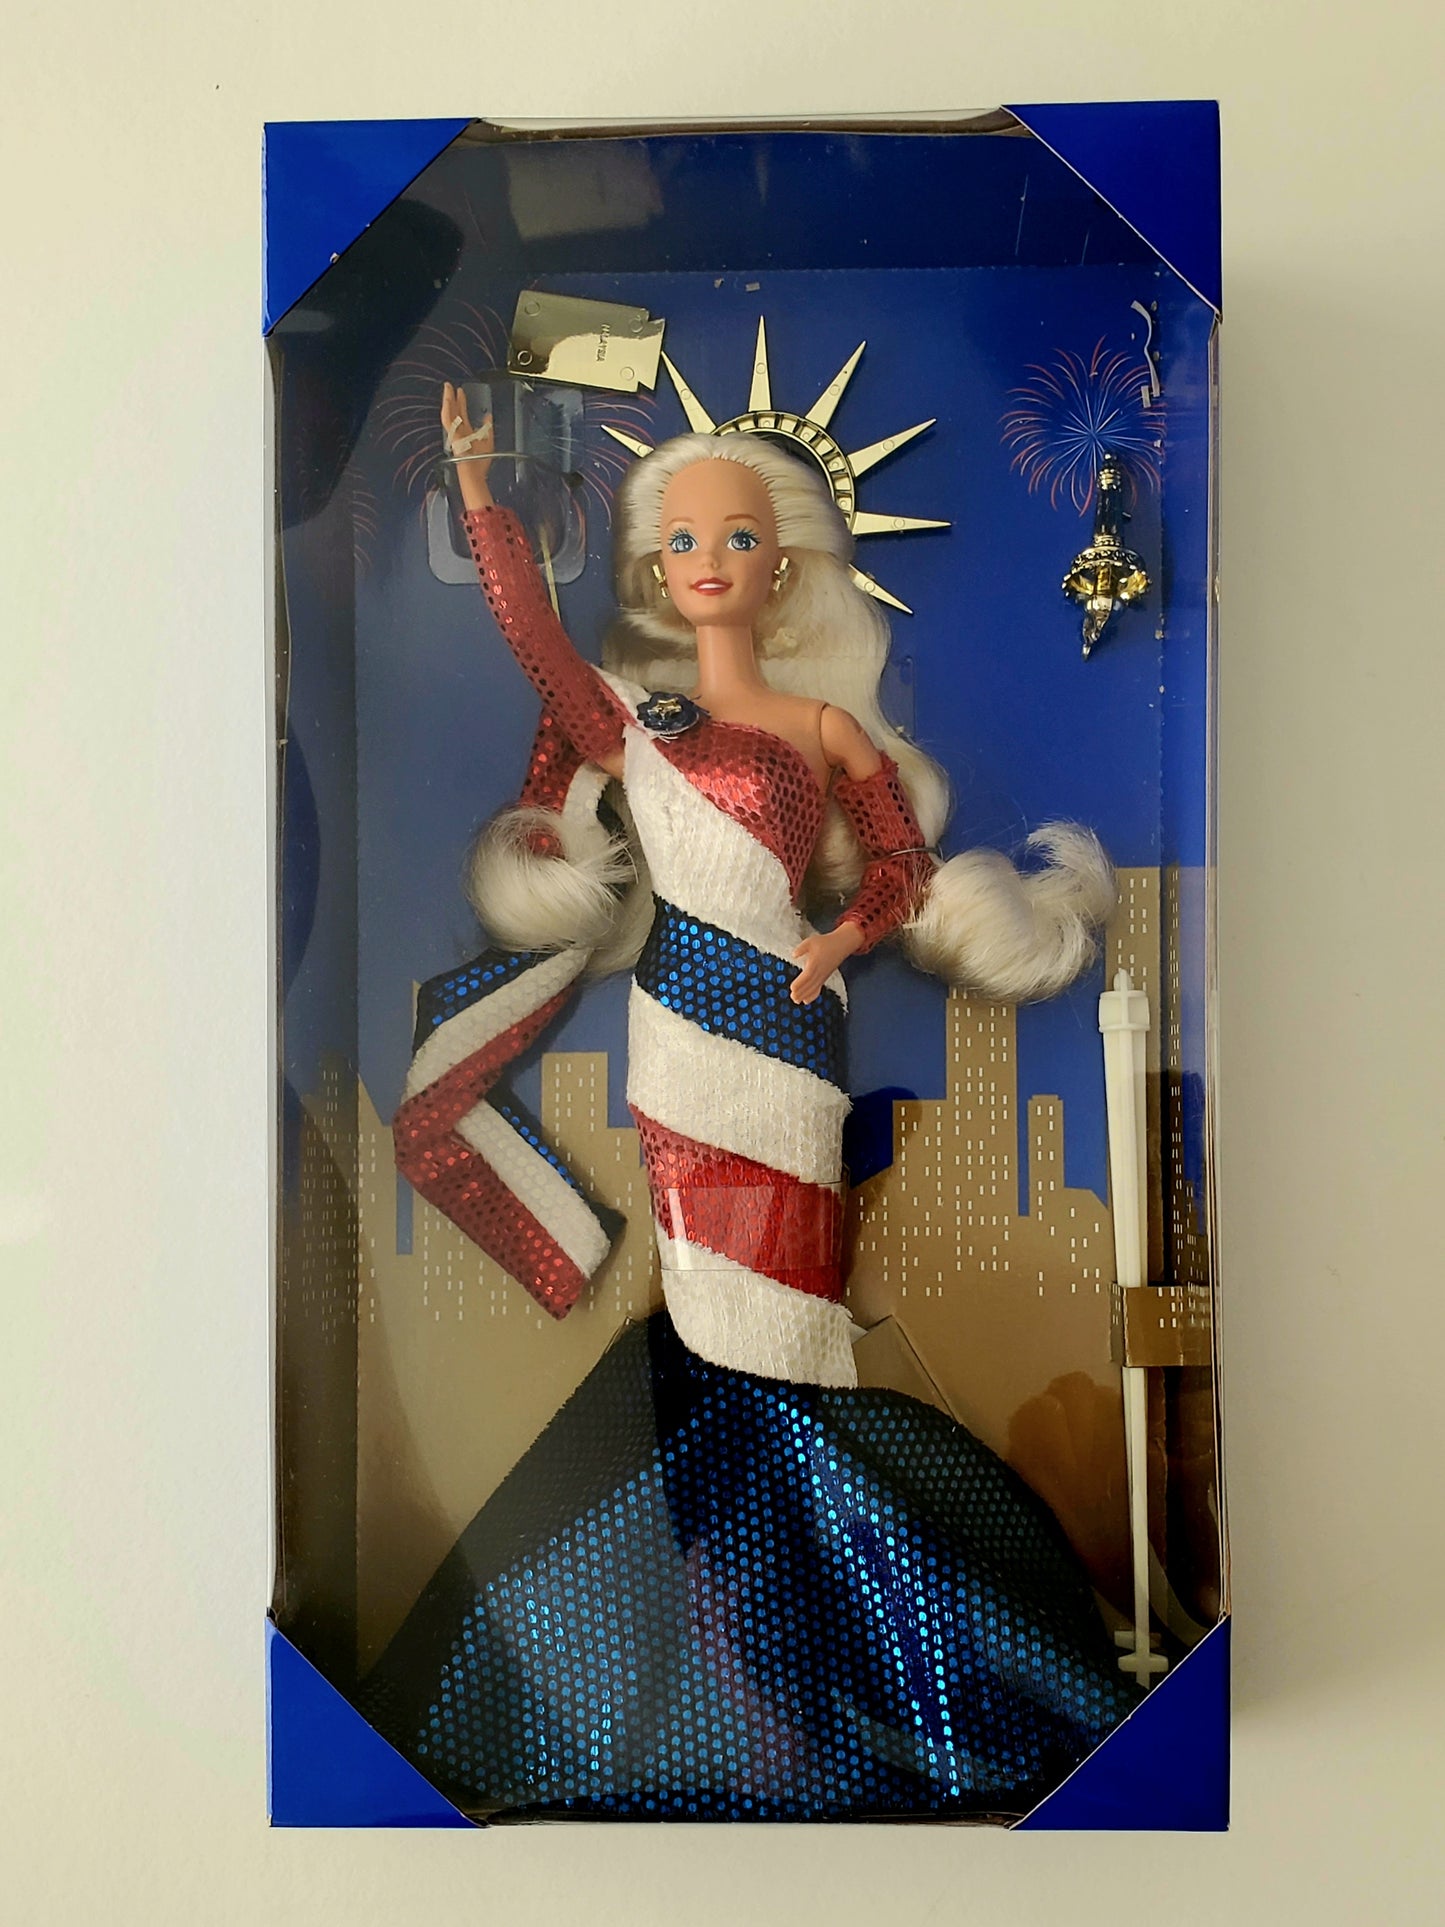 Statue of Liberty Barbie from FAO Schwarz